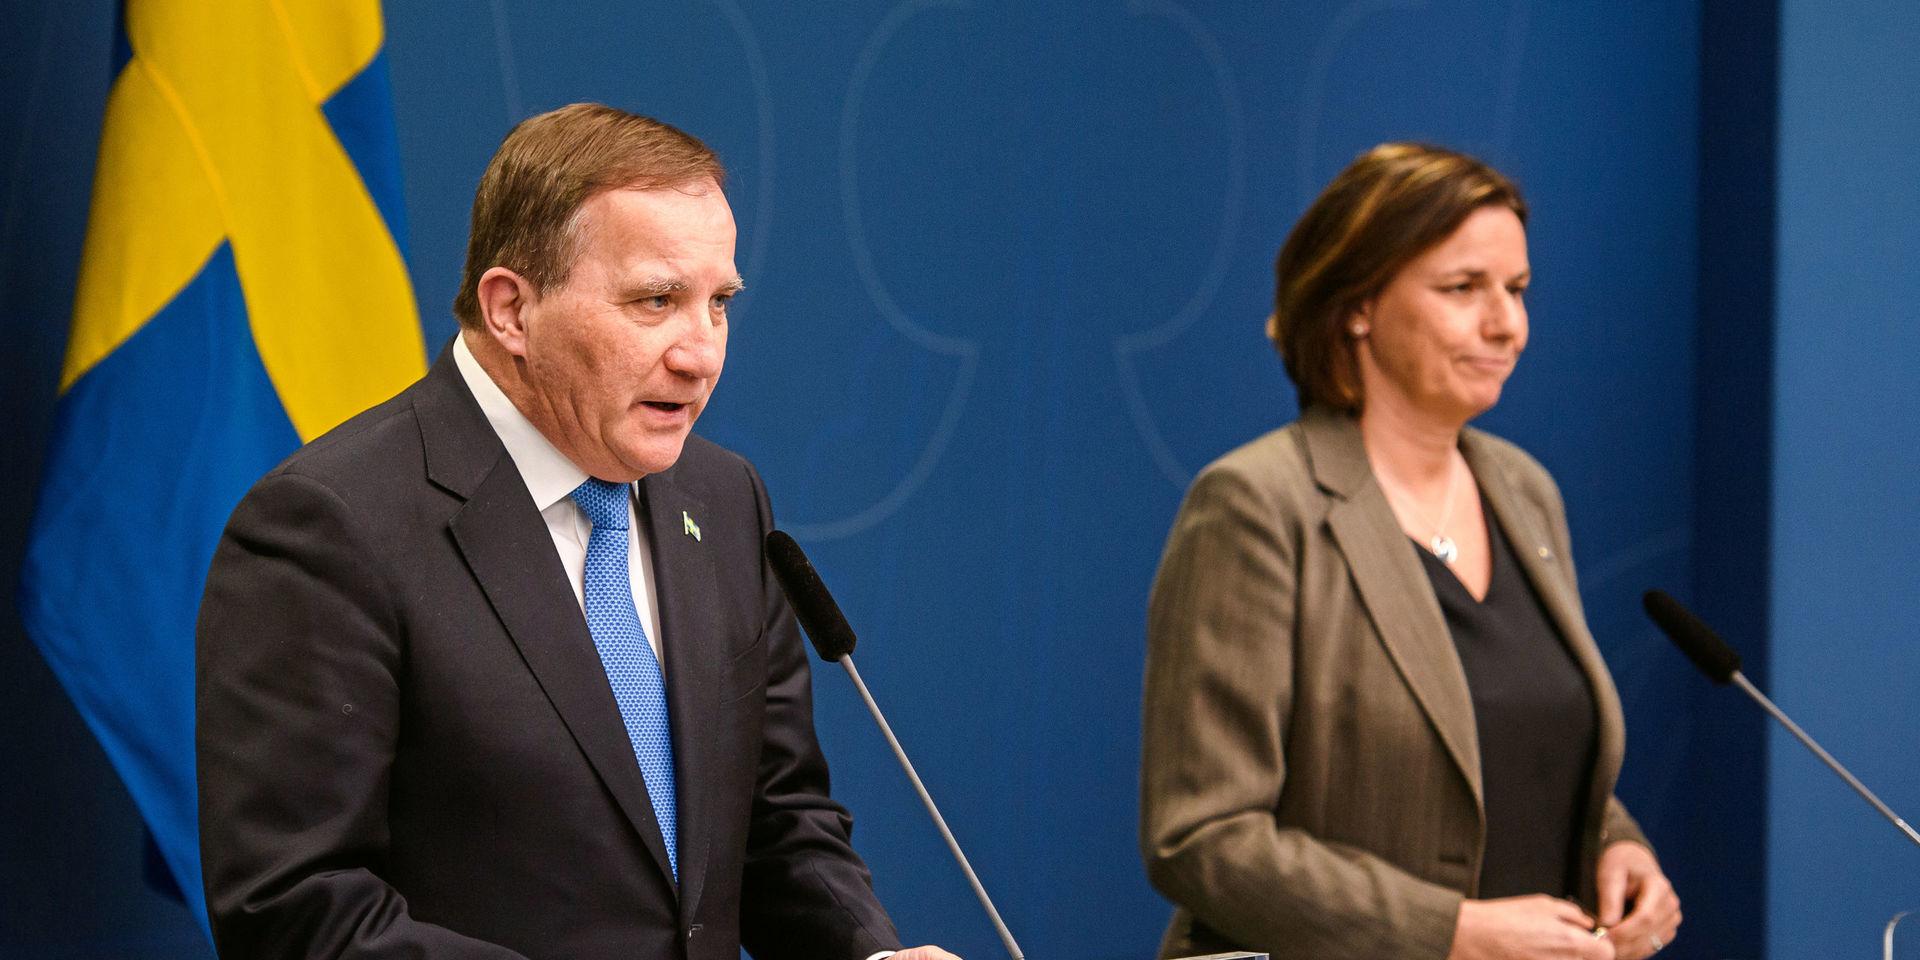 200331 Stefan Löfven, Prime Minister of Sweden, at a press conference with the government of Sweden regarding the coronavirus, covid-19, on March 31, 2020 in Stockholm. 
Foto: Maxim Thoré / BILDBYRÅN